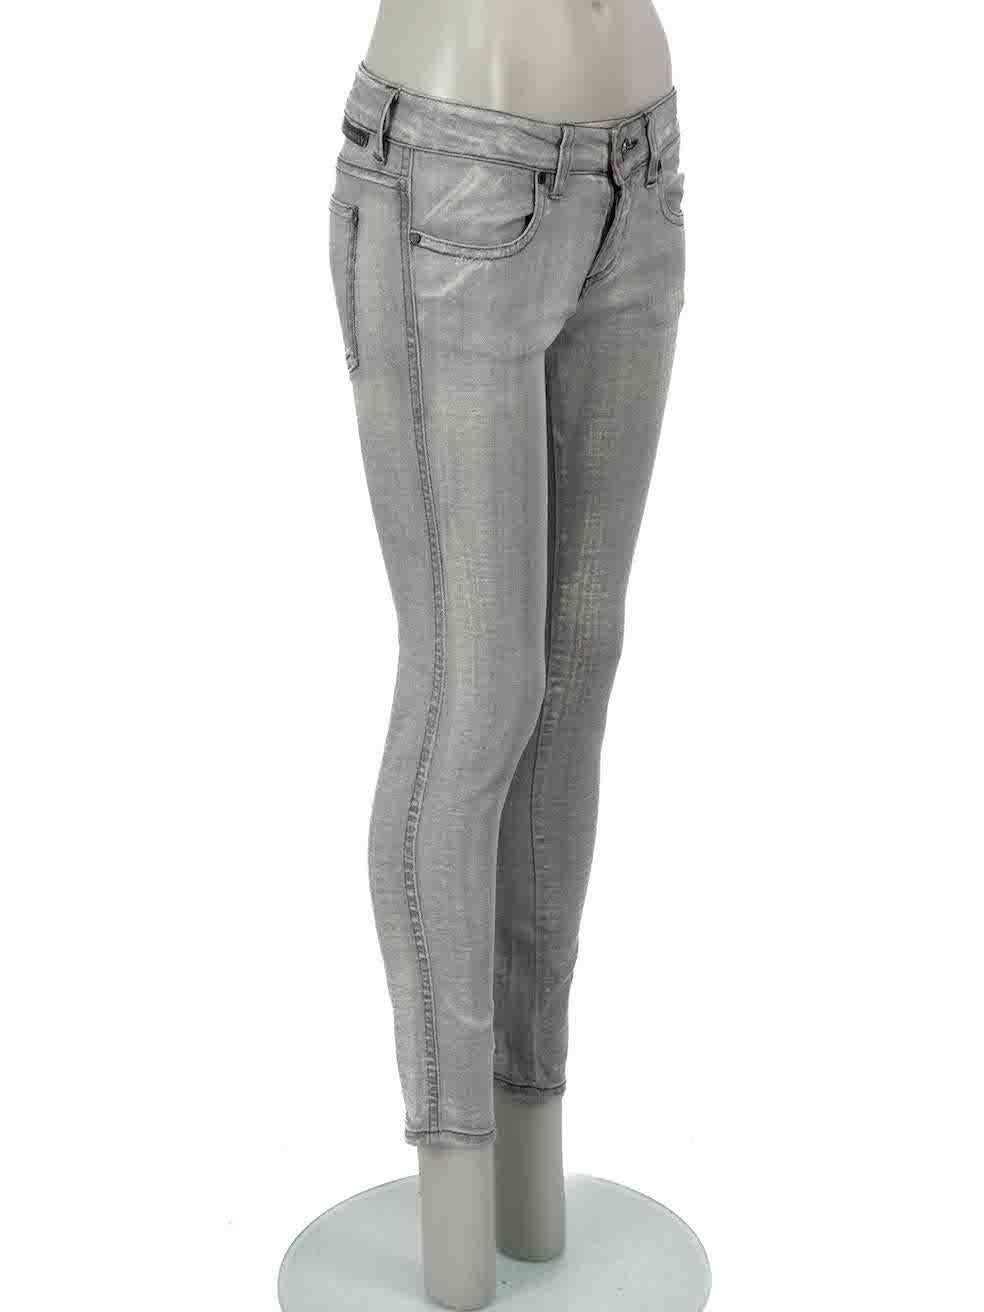 CONDITION is Very good. Minimal wear to jeans is evident. Minimal wear to the centre-front with small ladder to the weave on this used Stella McCartney designer resale item.
  
Details
Grey
Cotton
Jeans
Stone wash
Skinny fit
Low rise
2x Front